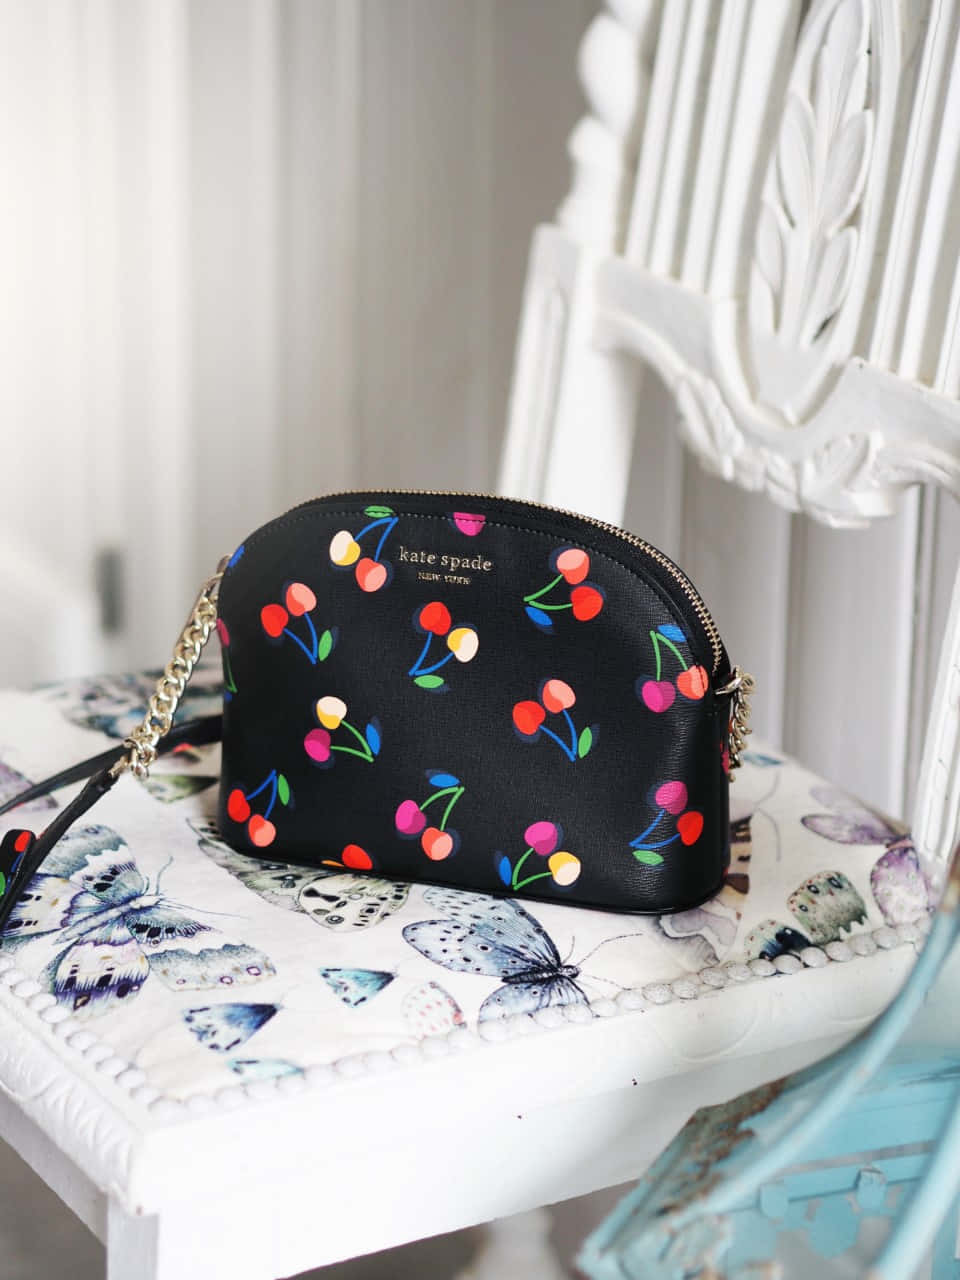 A Black Purse With Cherries On It Sits On A Chair